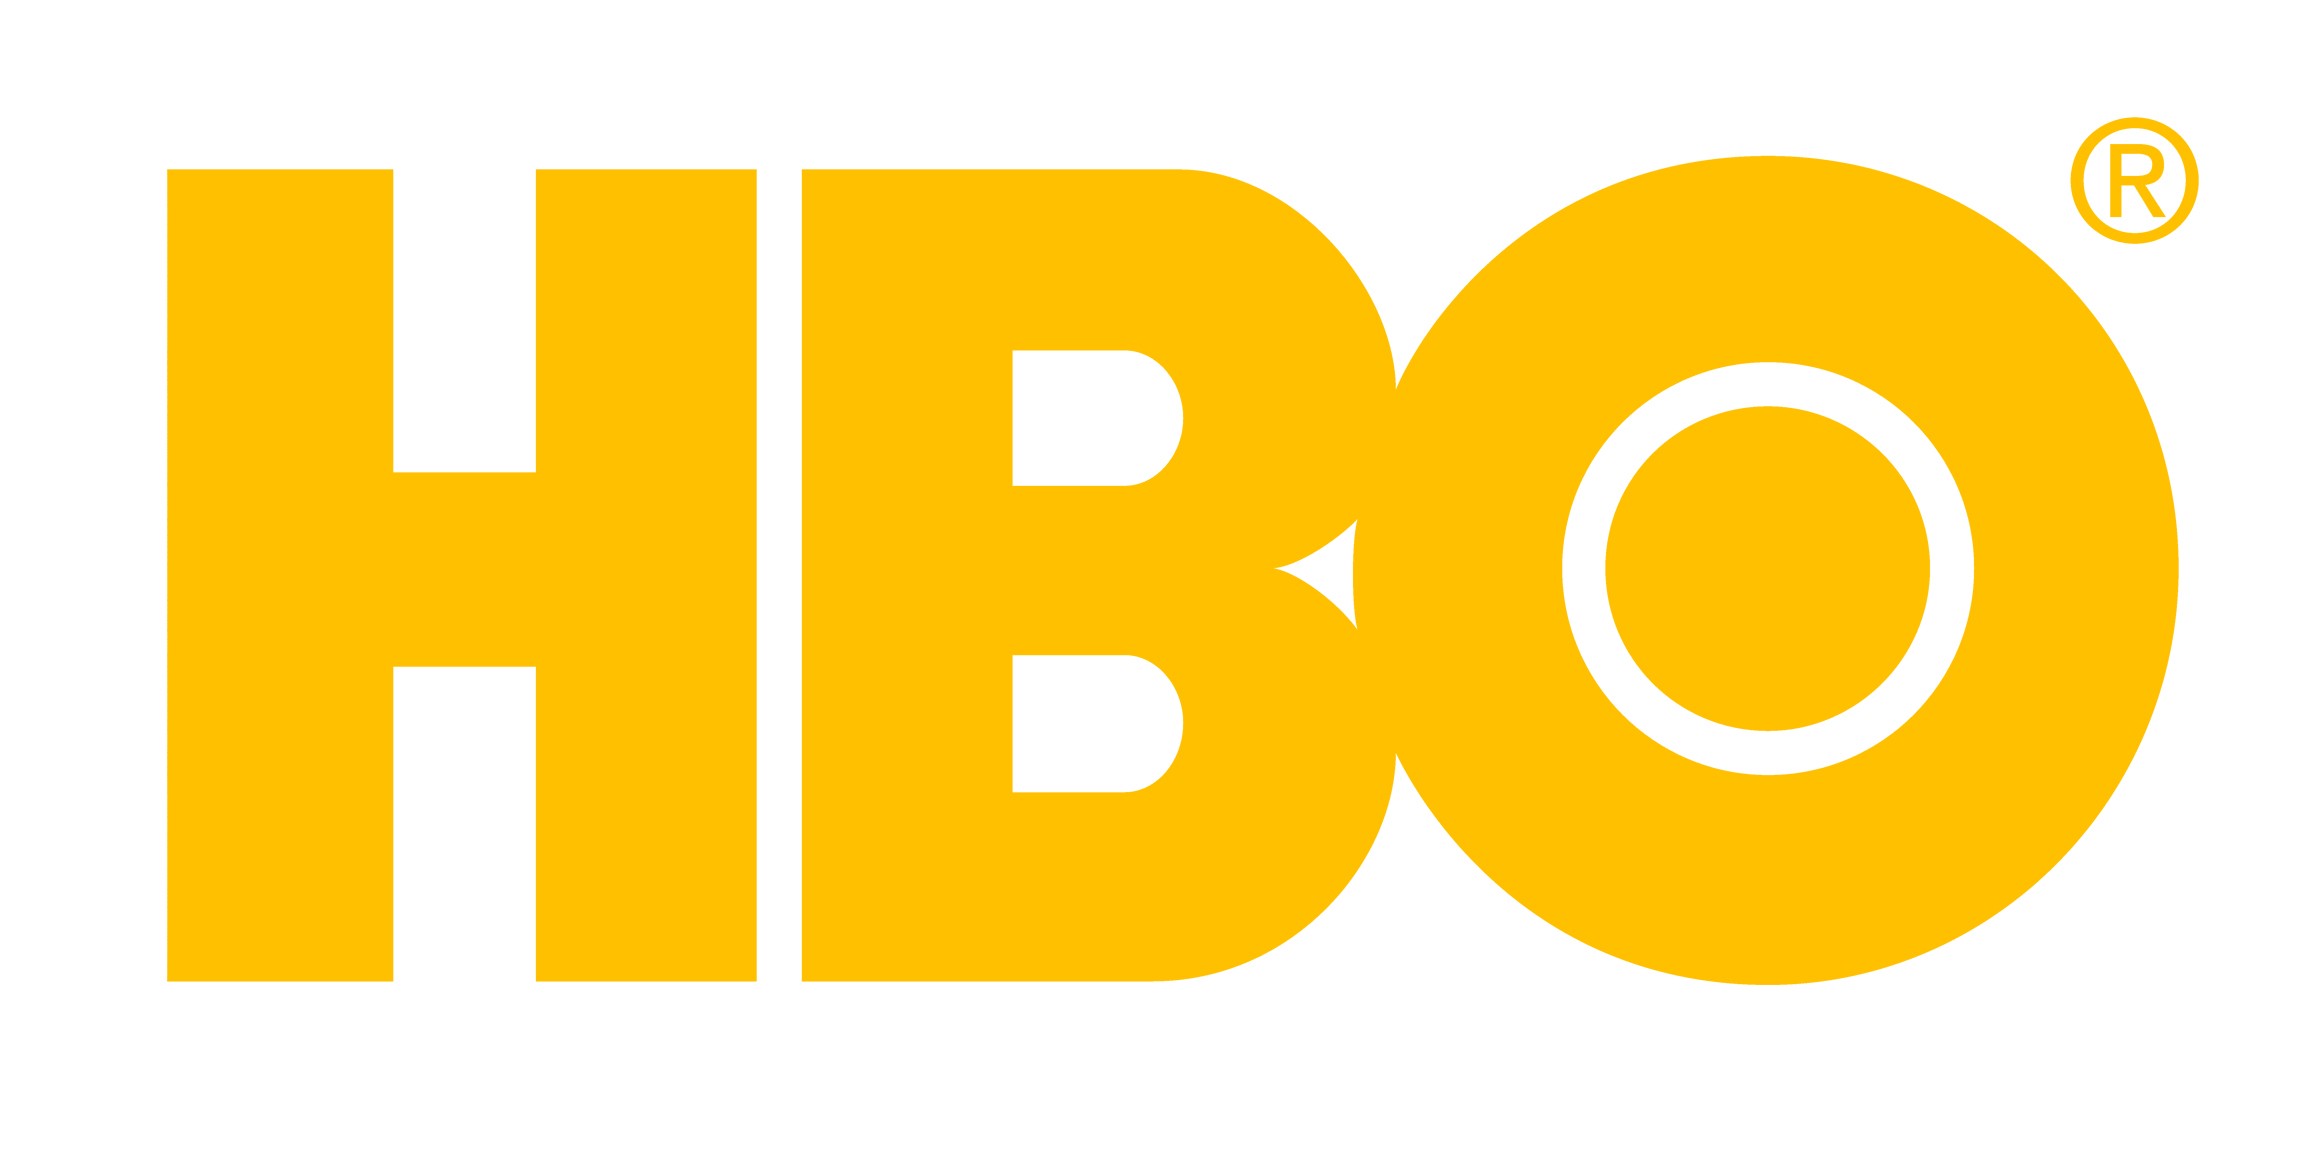 Meaning HBO logo and symbol | history and evolution2300 x 1150